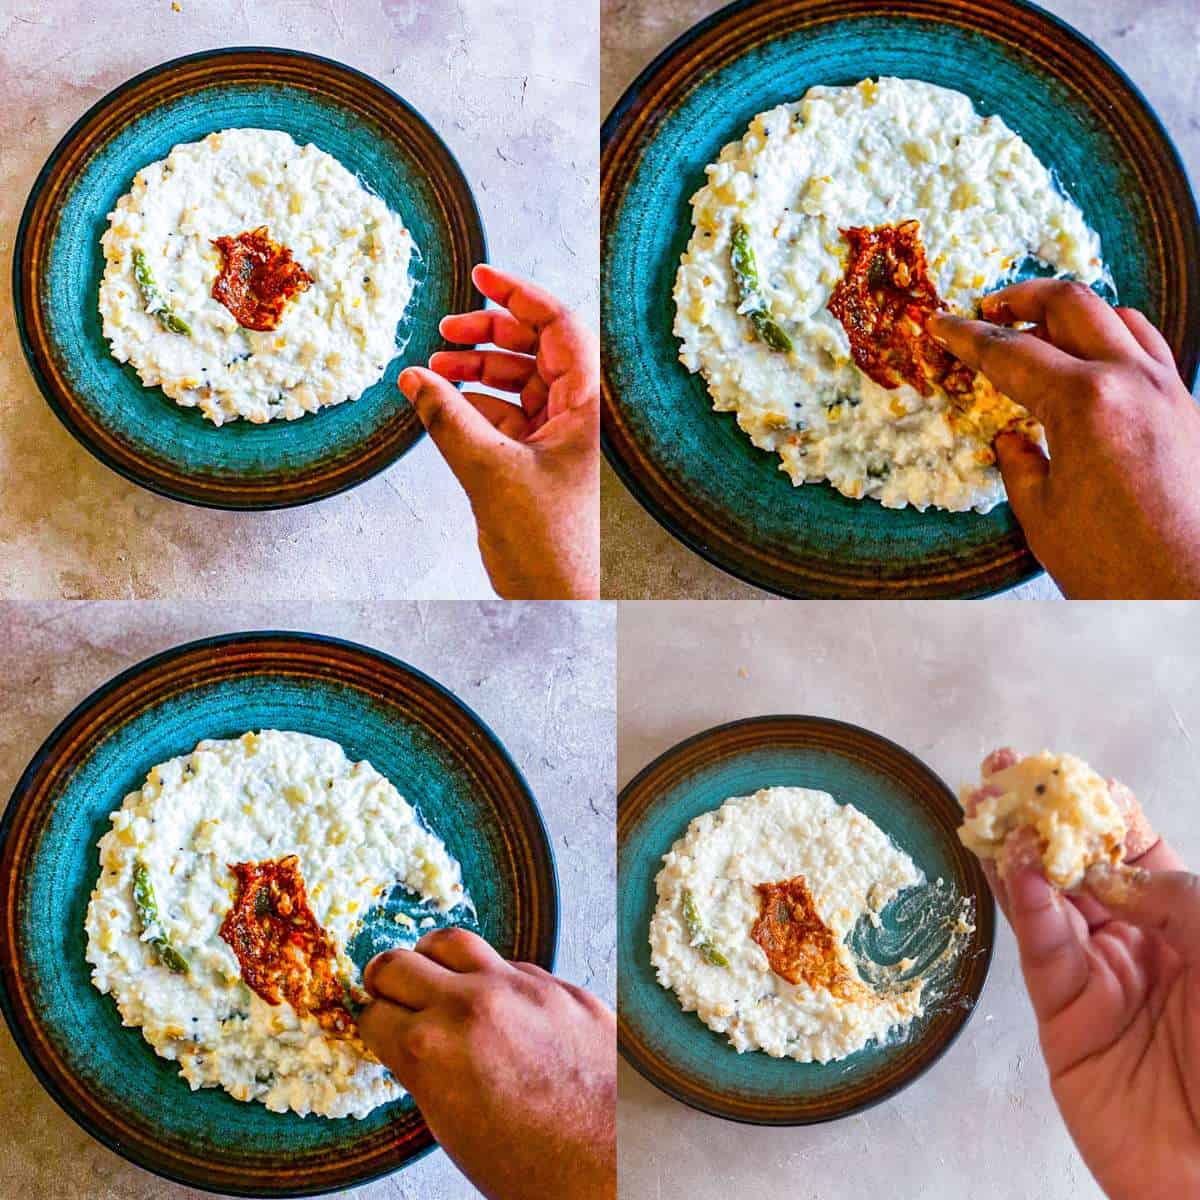 A series of four photos showing the steps of eating thayir sadam (yogurt rice) with your hands. First photo shows the hand reaching for food, the second shows the index finger reaching for the pickle to mix with the yogurt rice, the third photo shows the hands pursing the food, and the last photo shows the rice picked up from the plate.